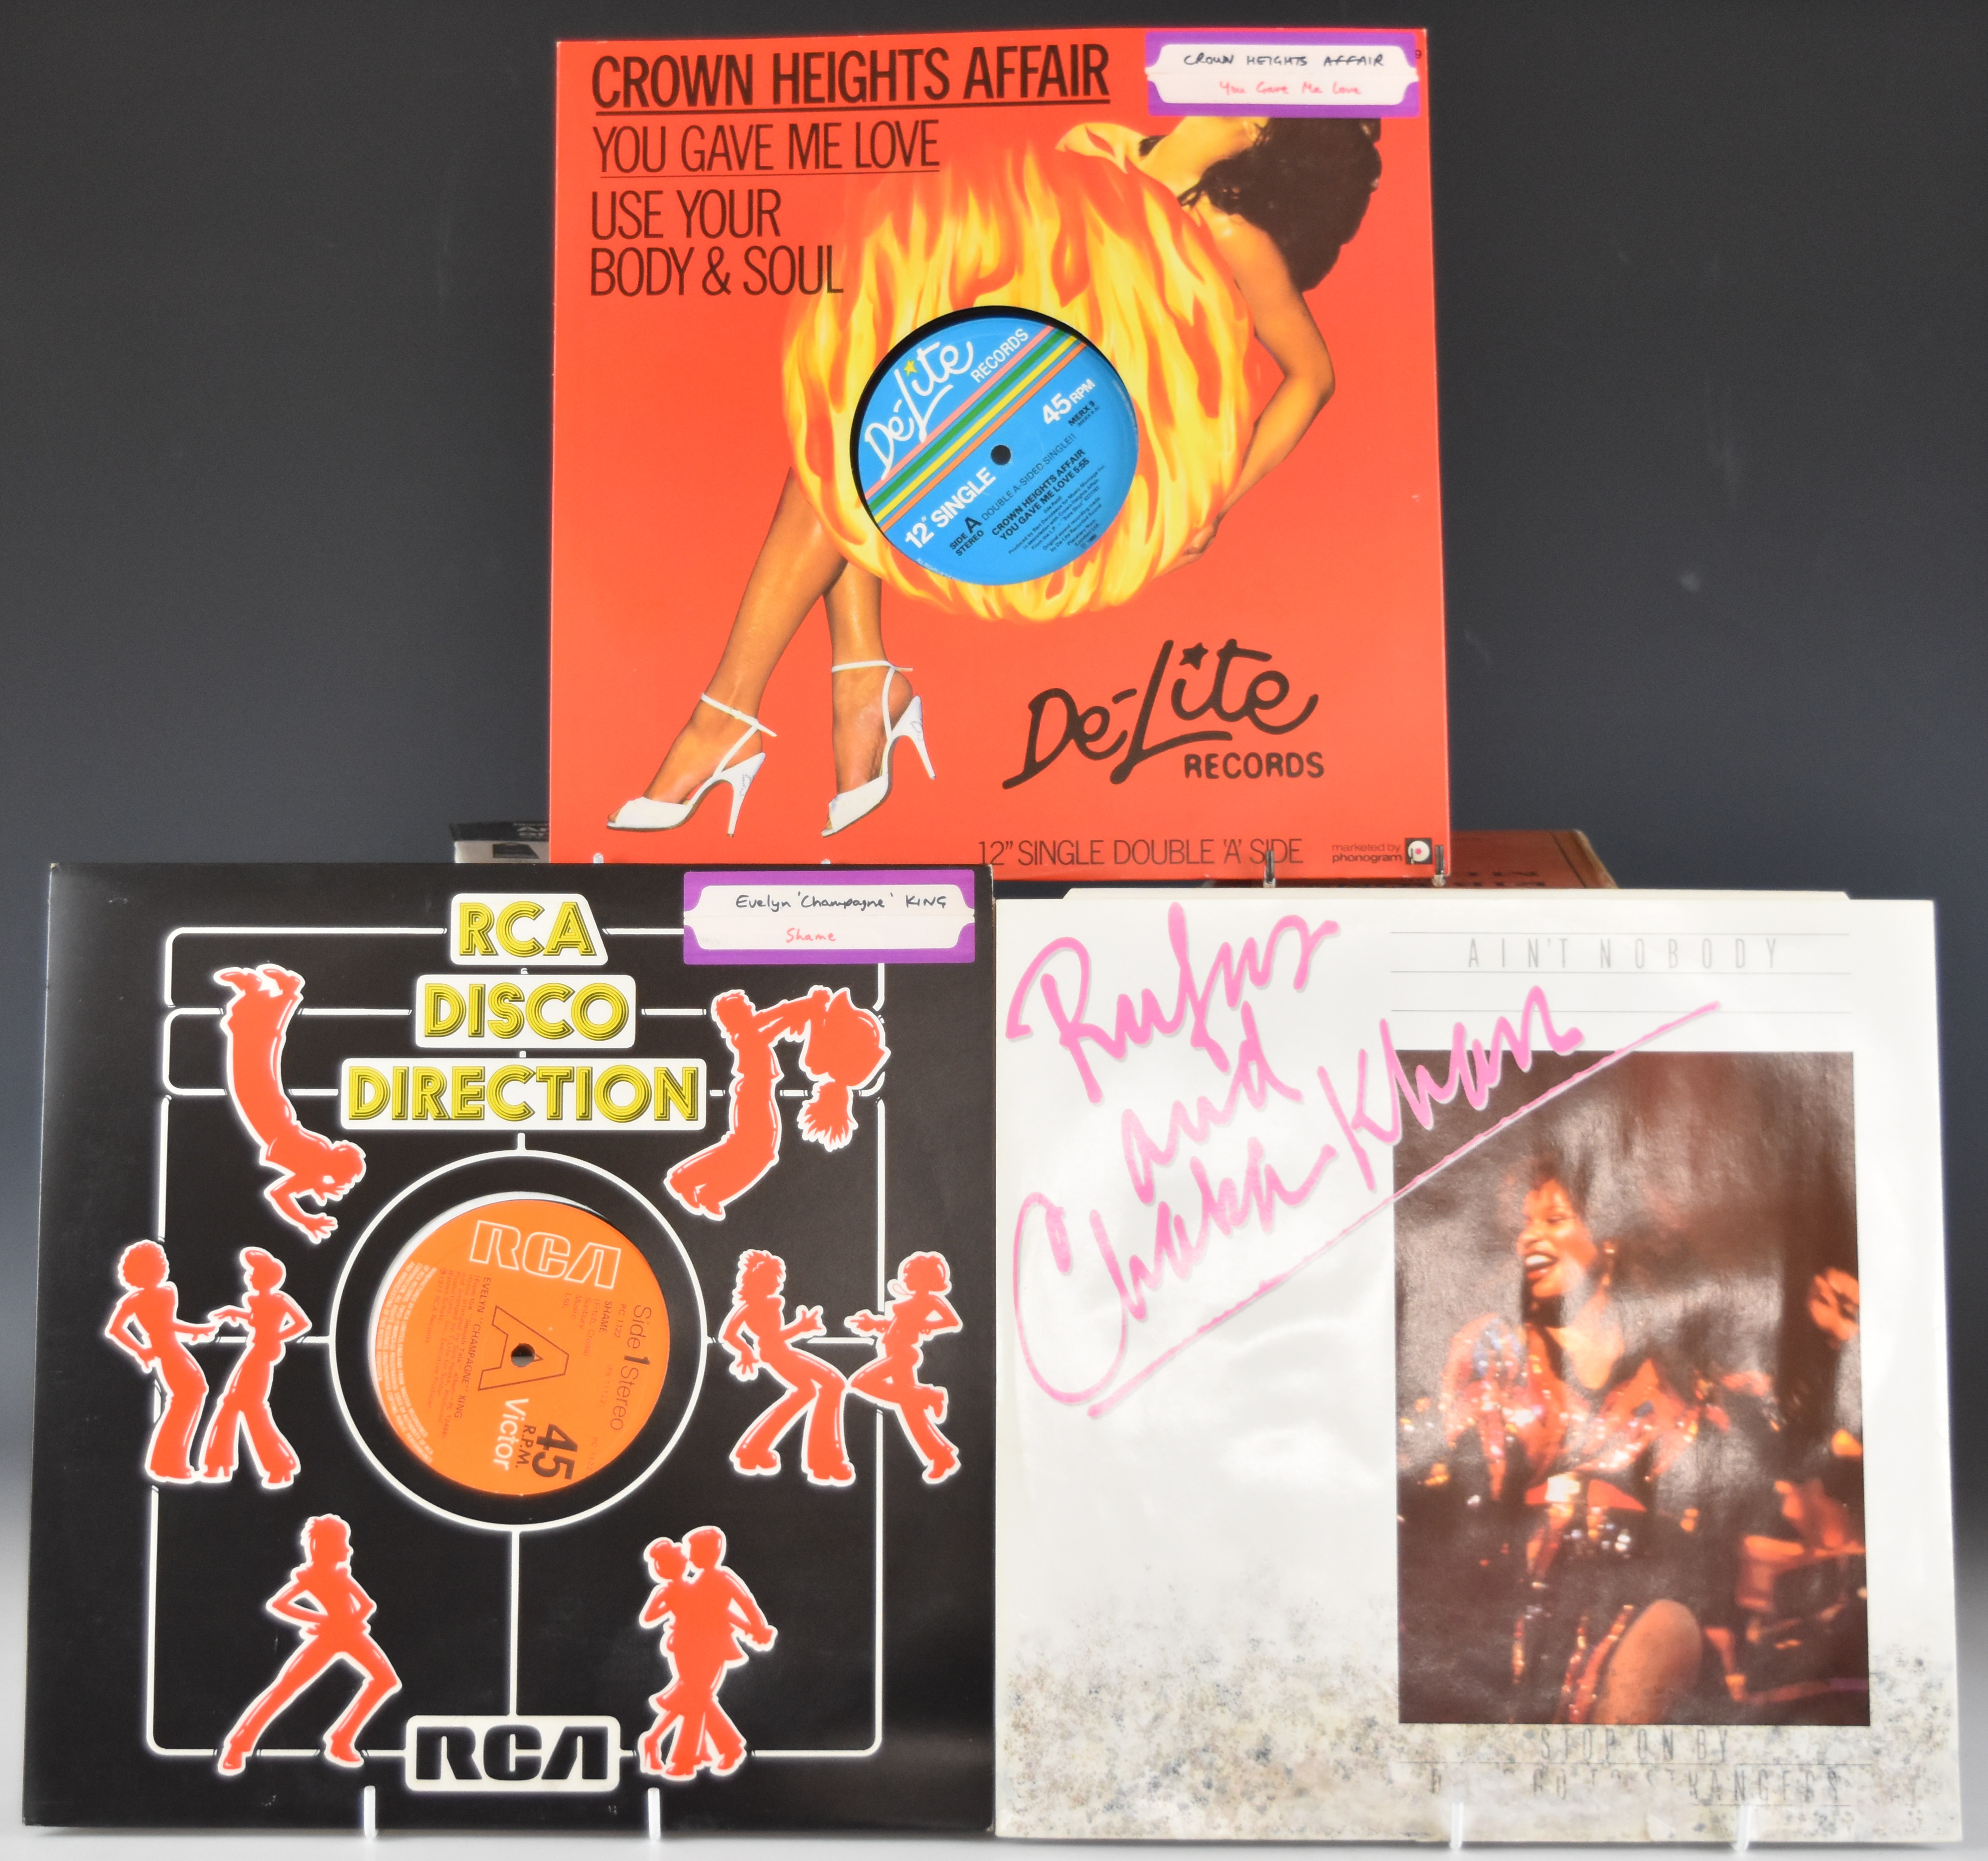 Approximately two hundred and twenty 12" singles, mostly late 1970s - Image 6 of 7